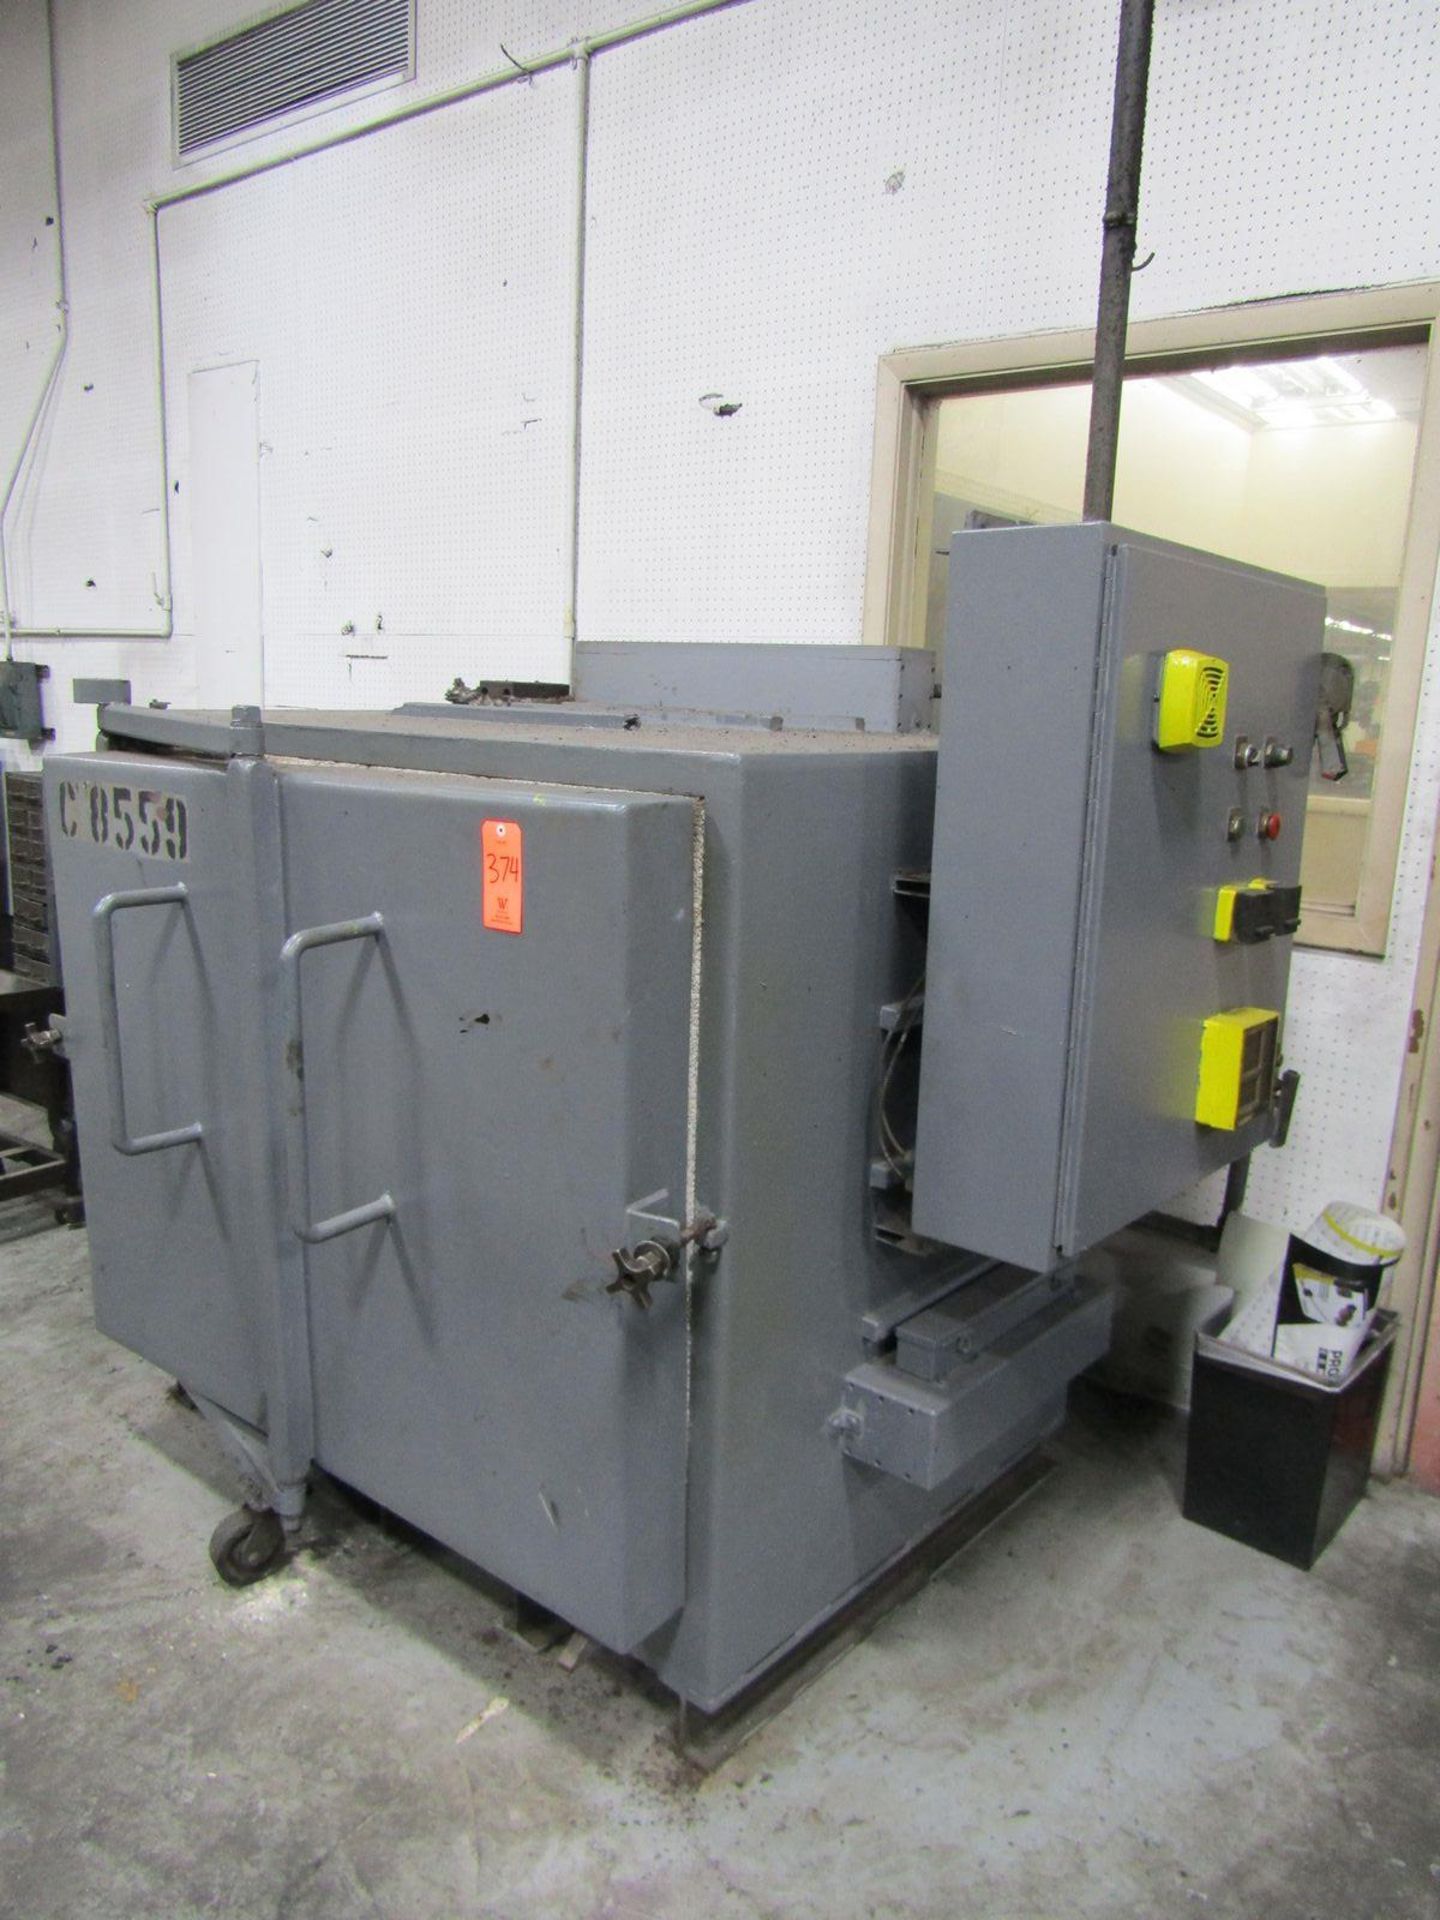 52 in. x 40 in. x 40 in. (approx.) Furnace; with Controls